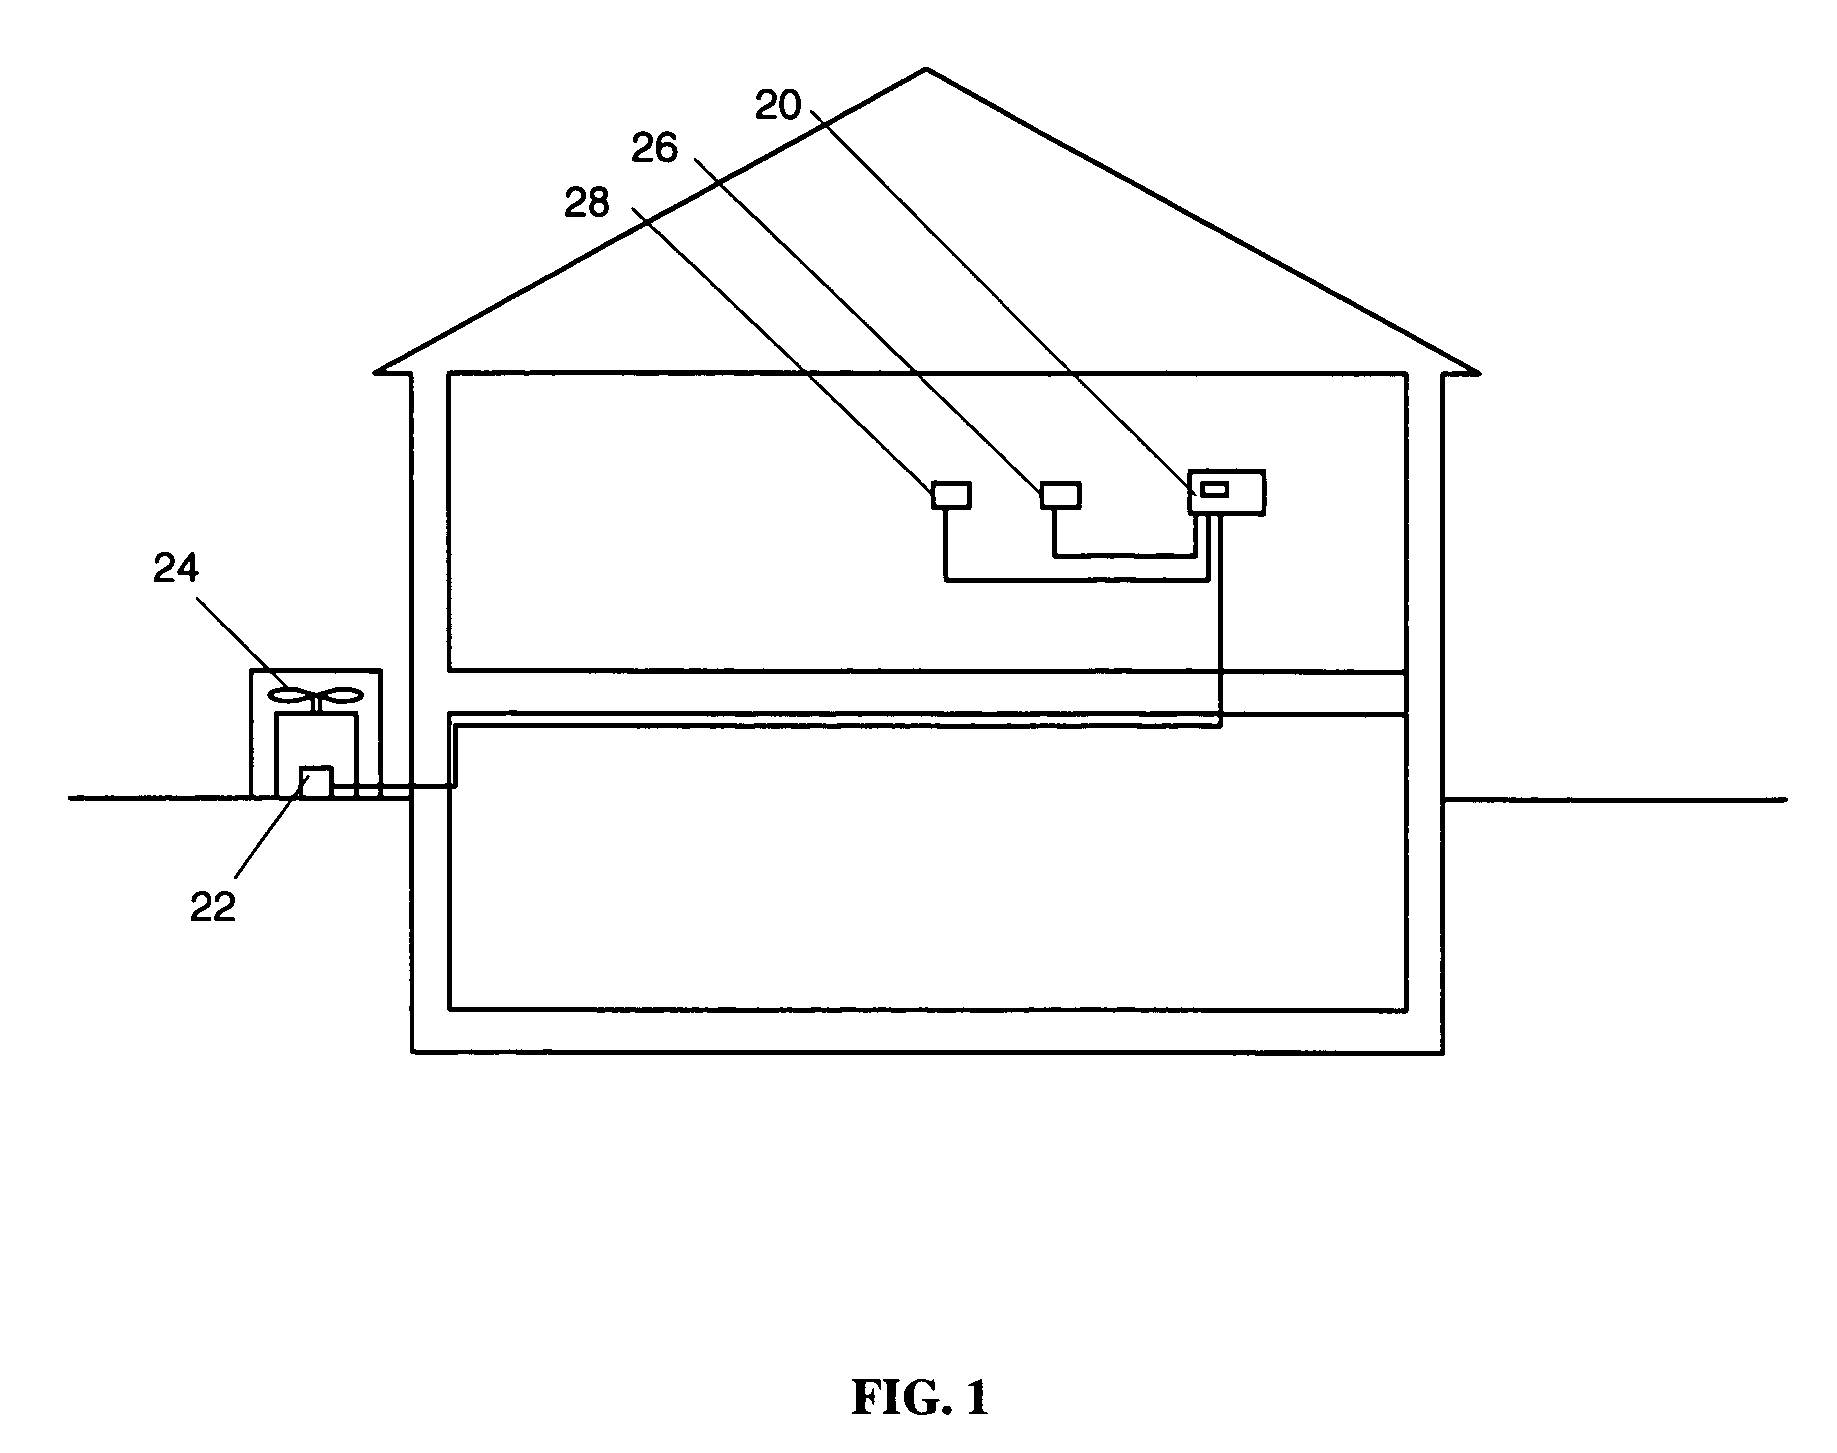 Thermostat and method for operating in either a normal or dehumidification mode